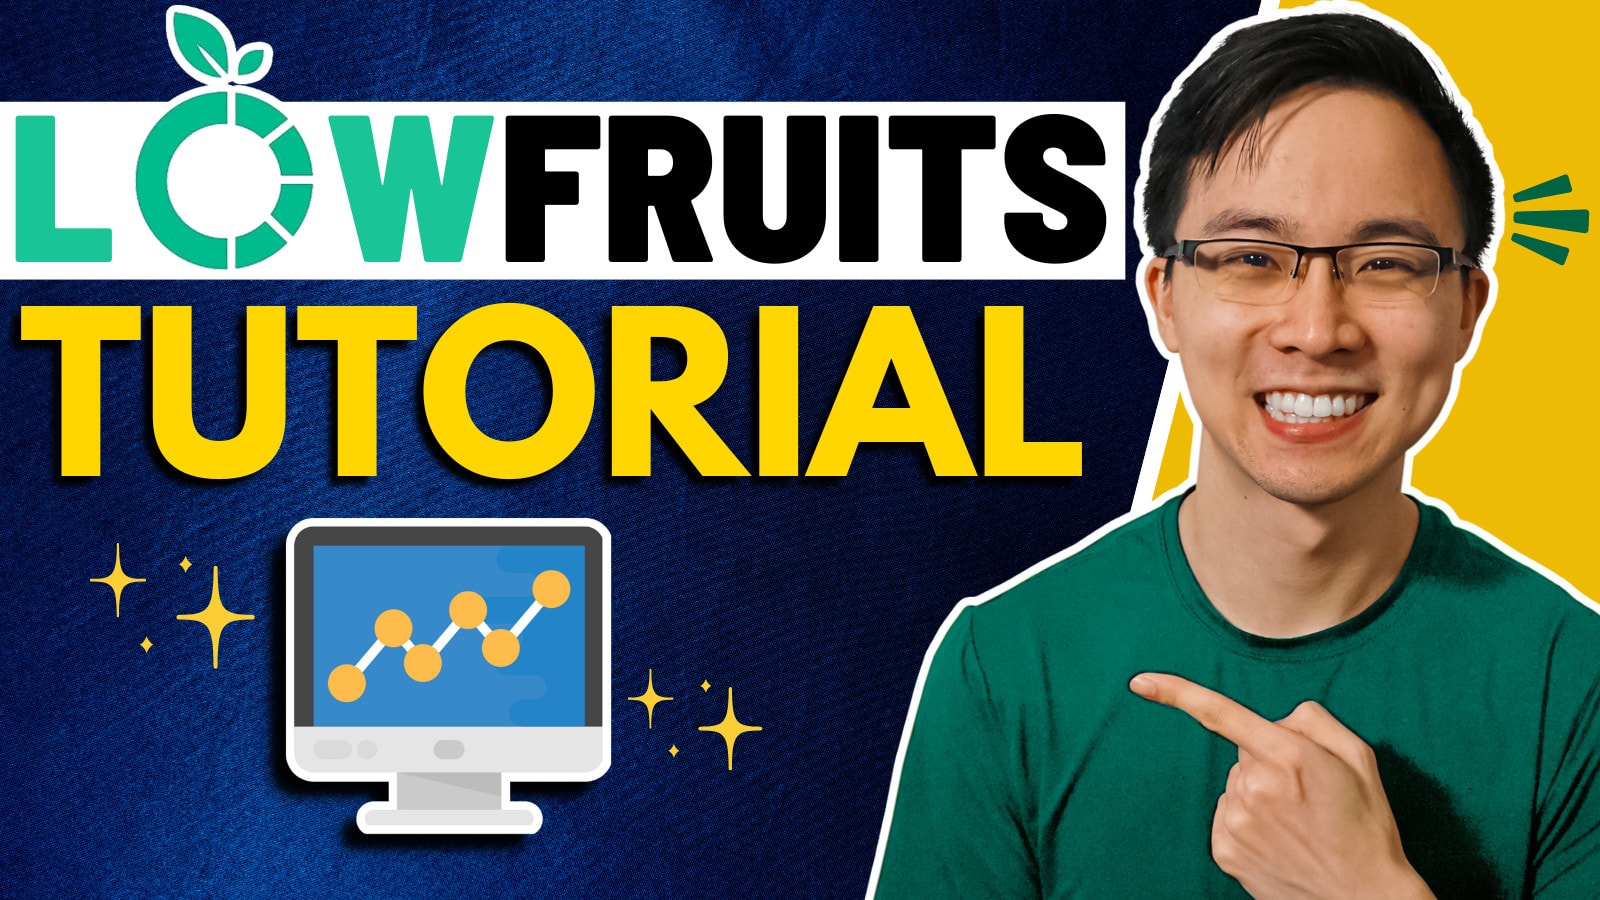 How to Easily Find Low Competition Keywords with Lowfruits